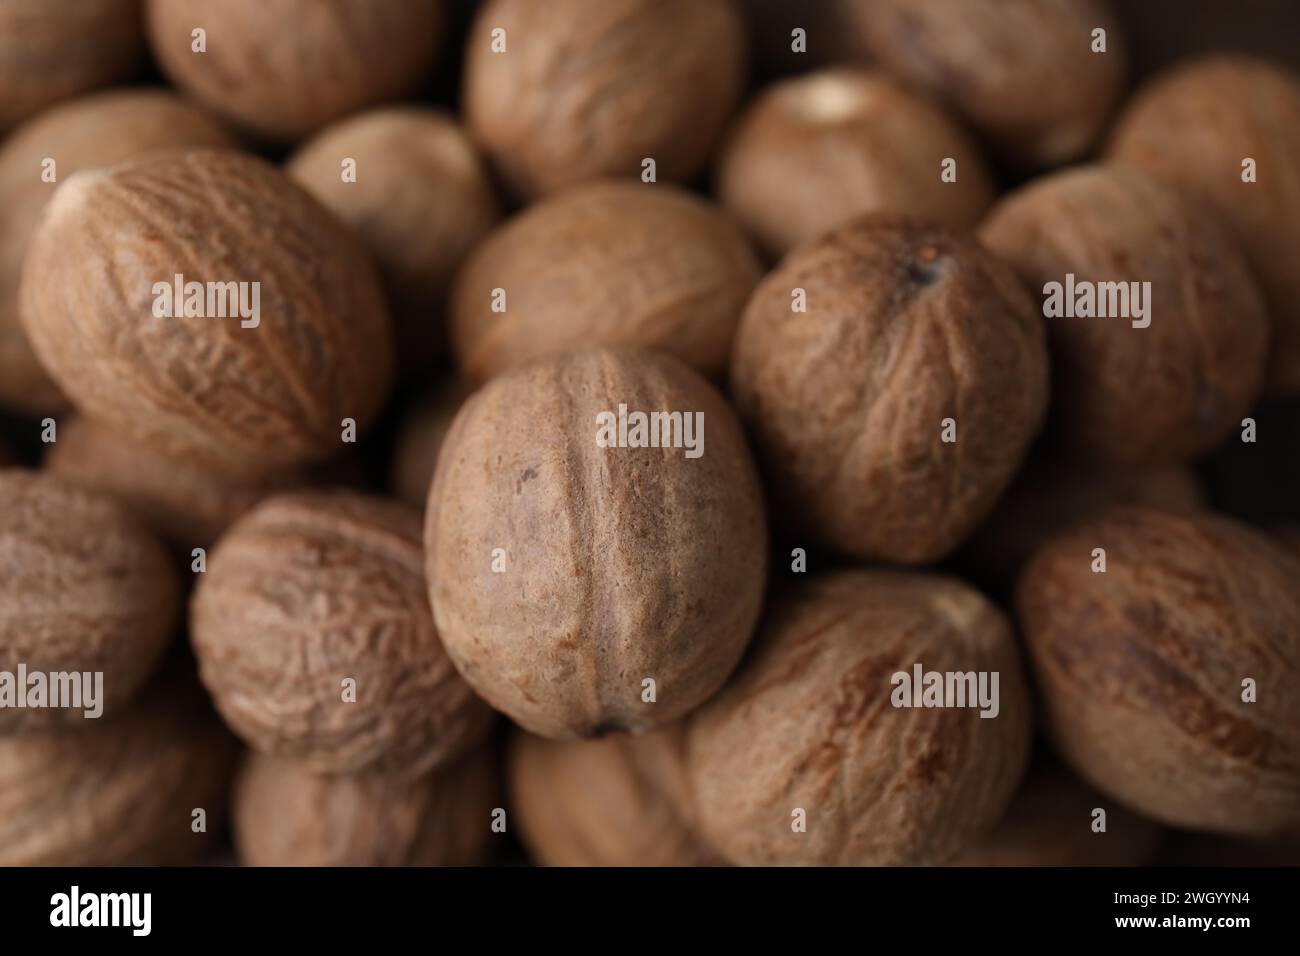 Many whole nutmegs as background, closeup view Stock Photo